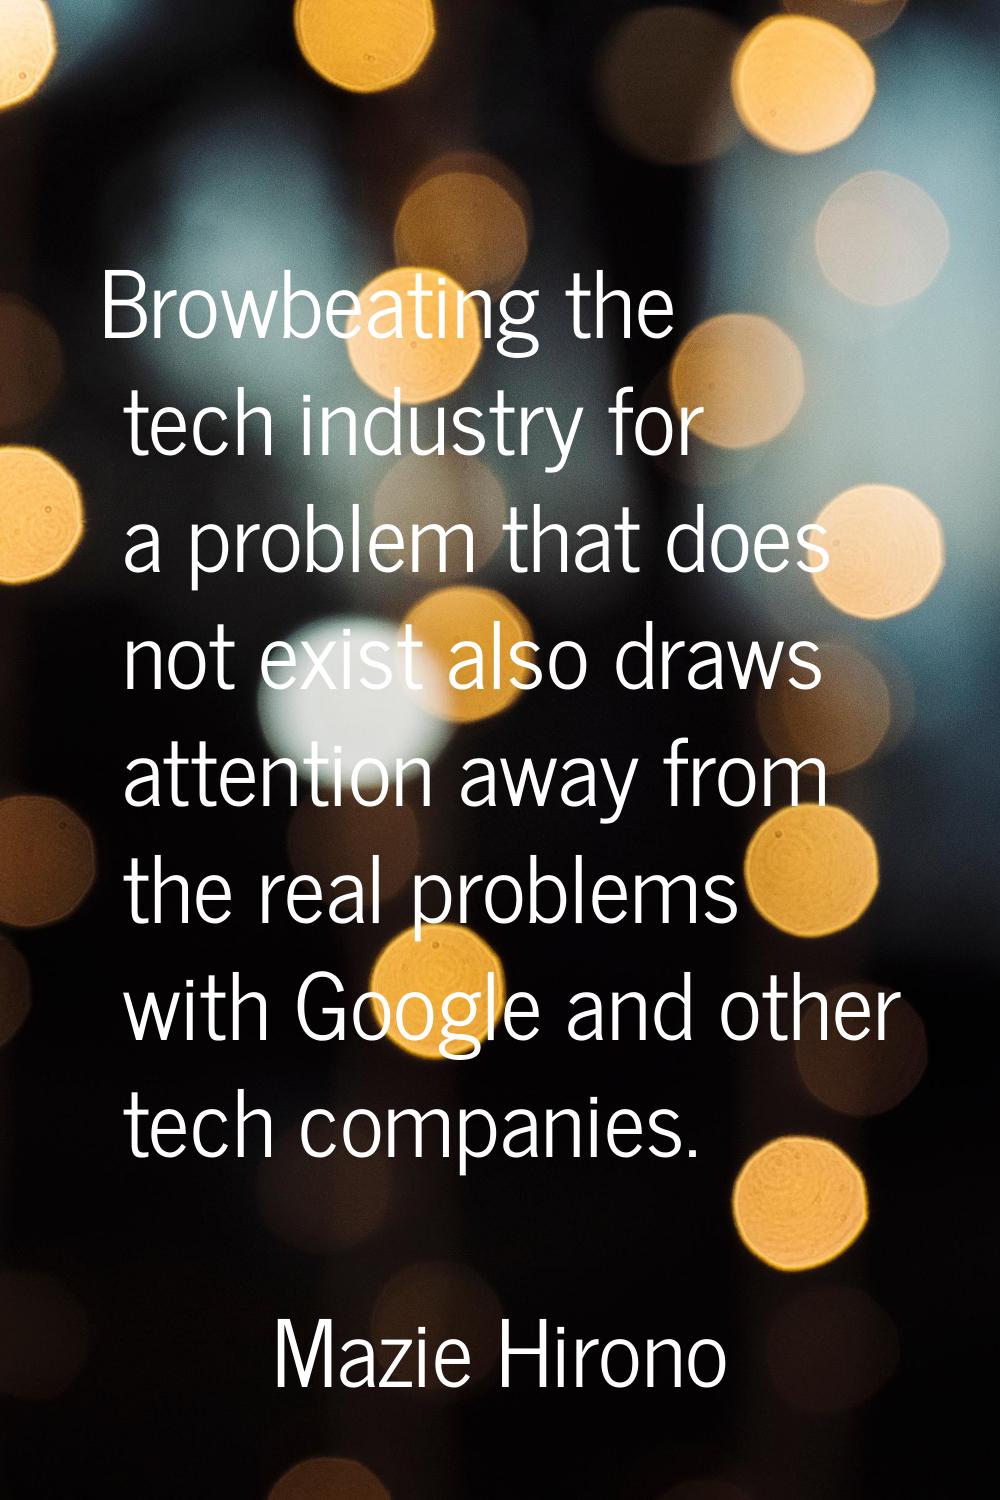 Browbeating the tech industry for a problem that does not exist also draws attention away from the 